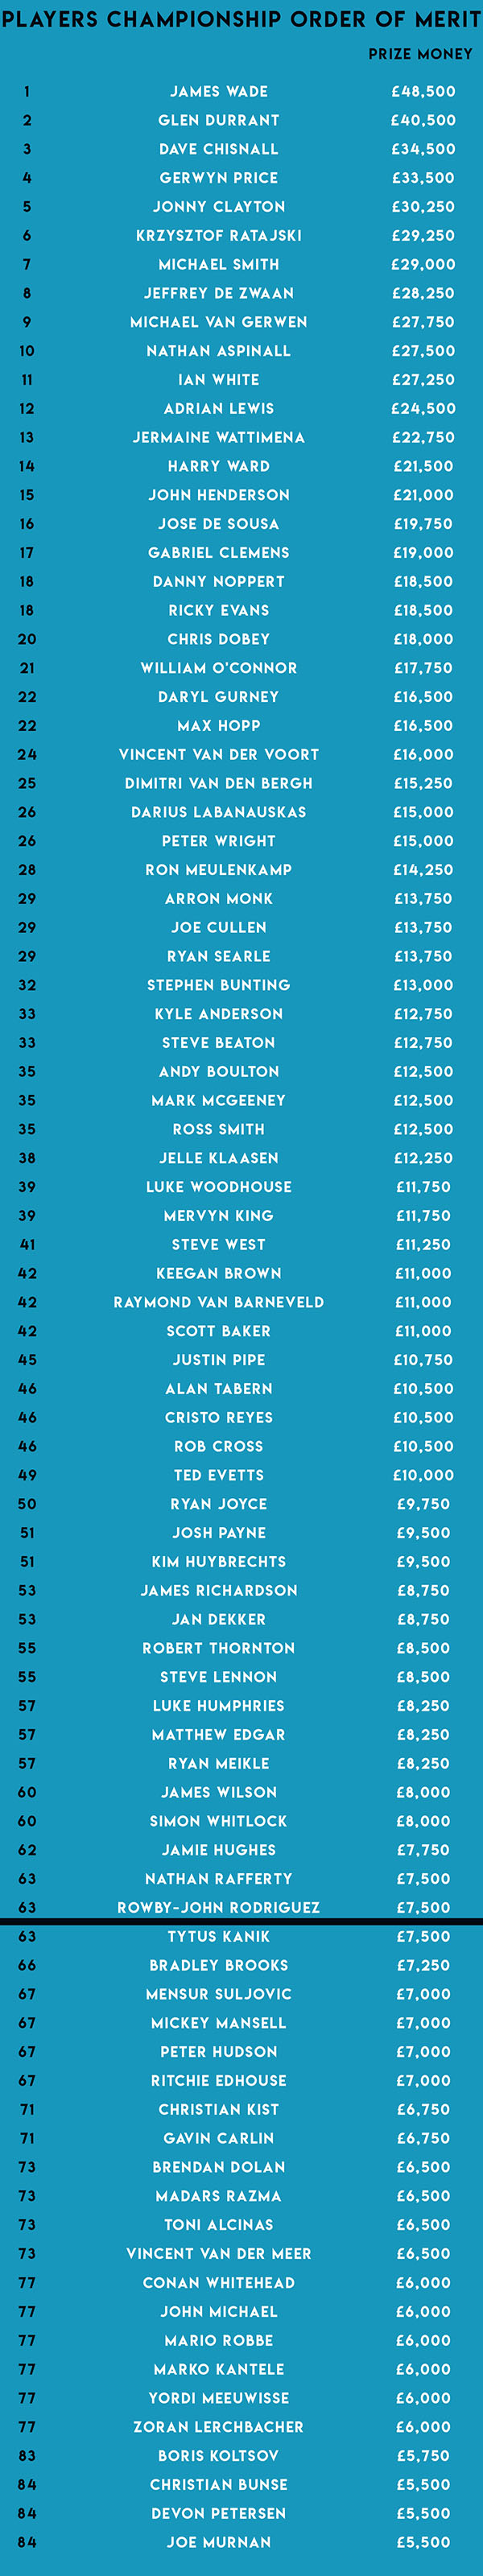 Players Championship Order of Merit (PDC)